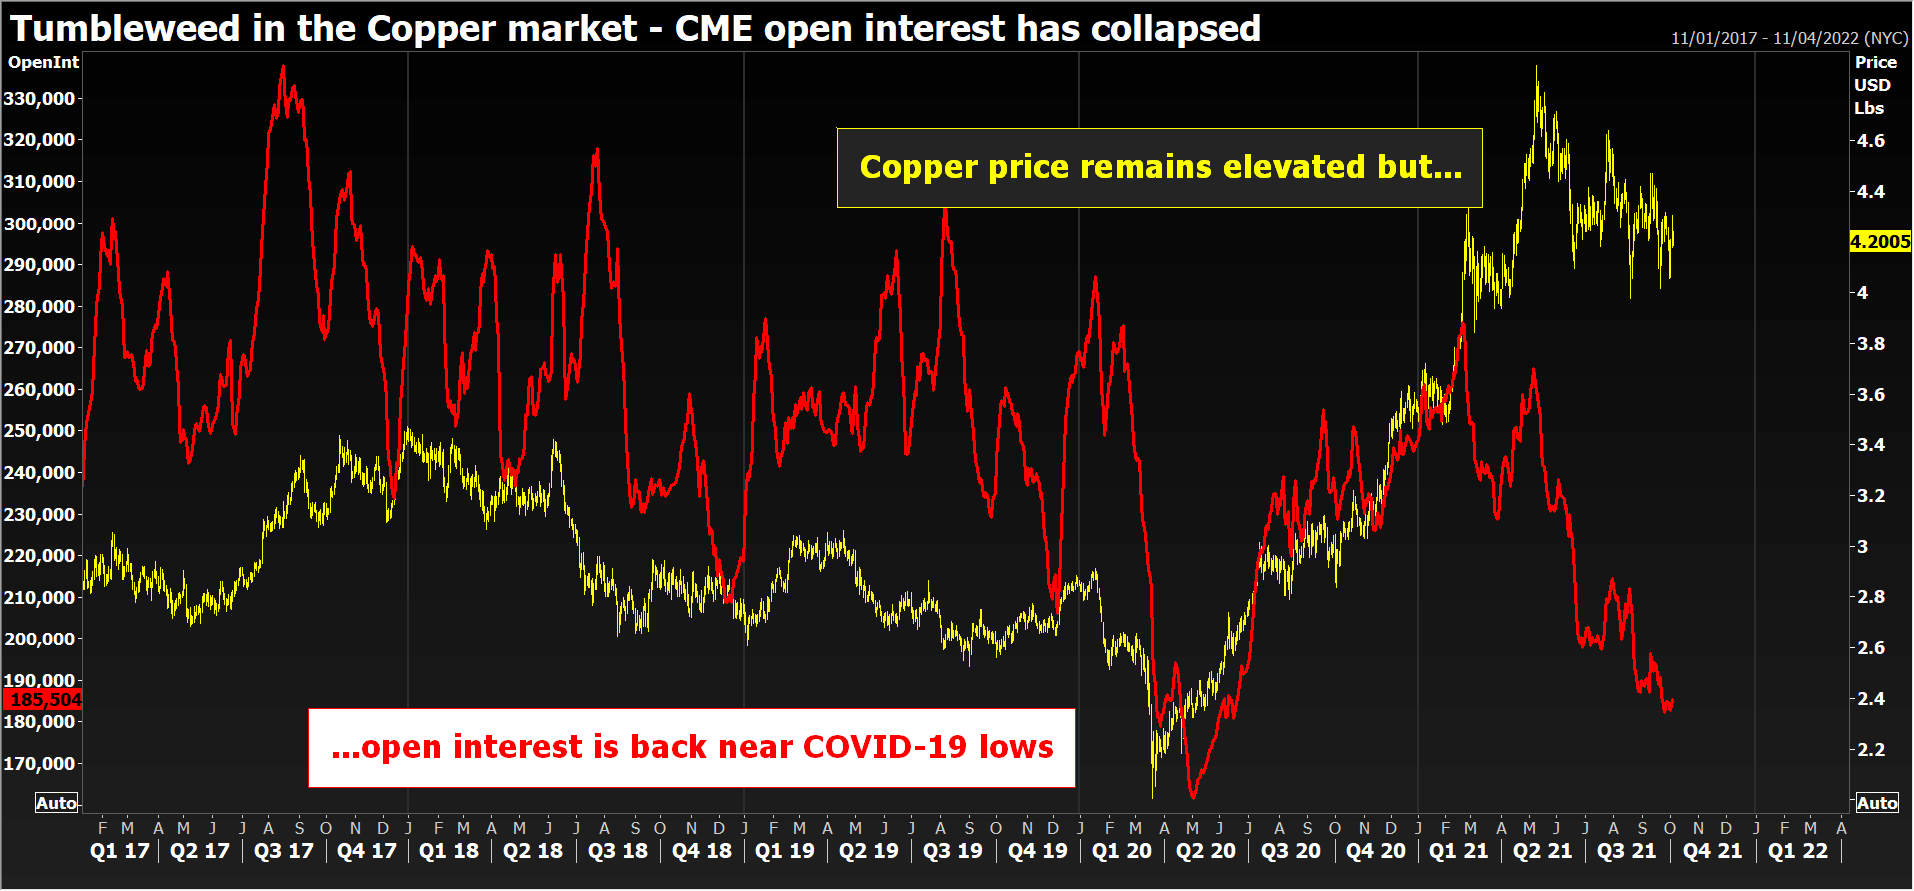 CME open interest has shrunk to COVID-19 levels